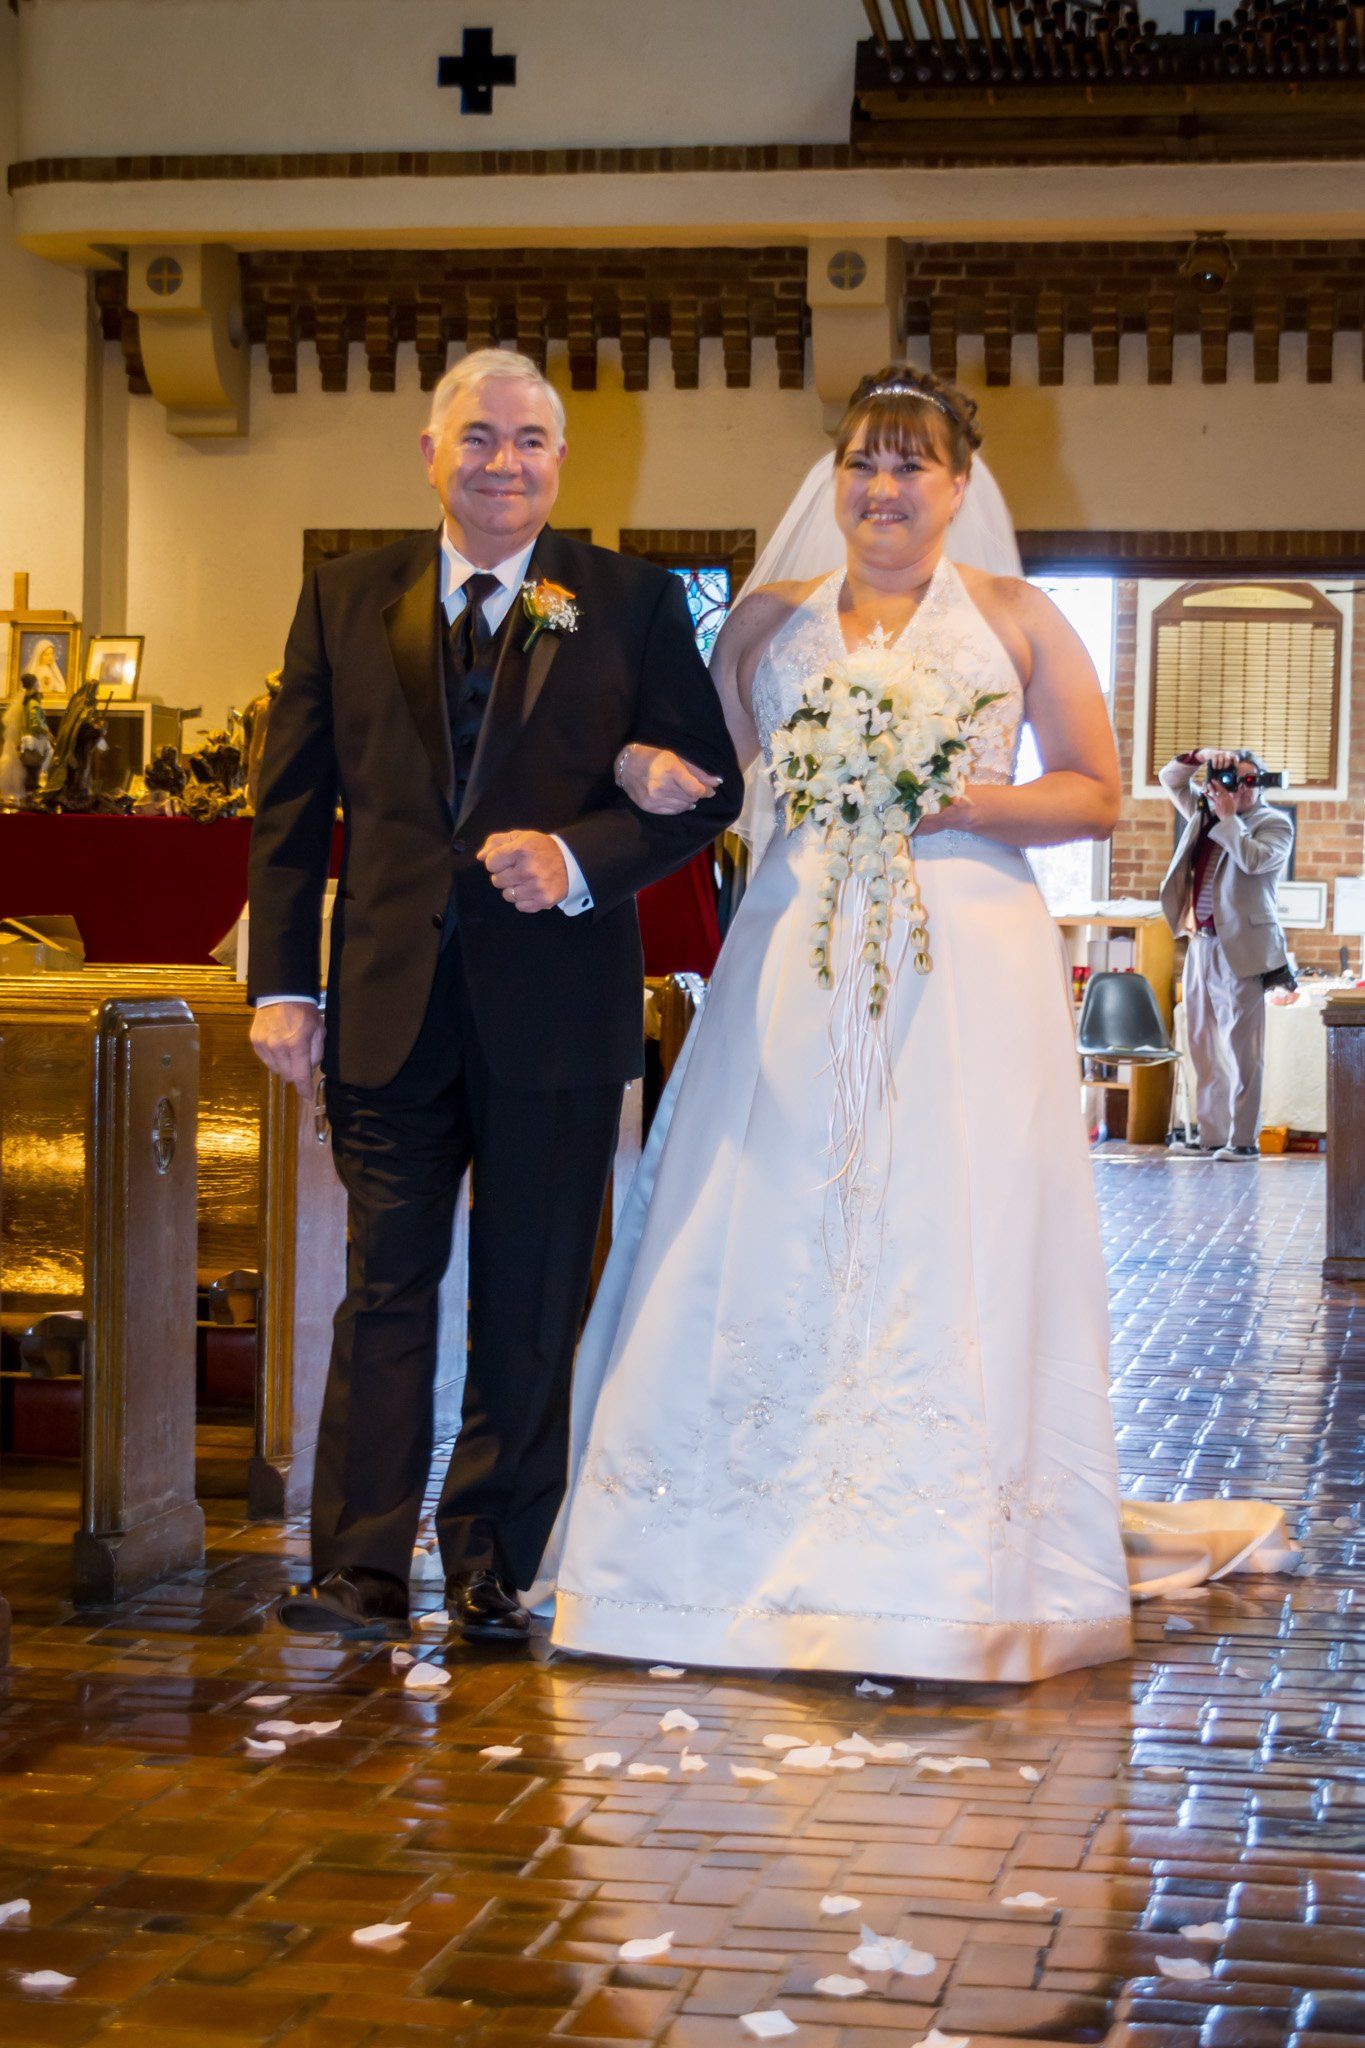 A bride being walked down the aisle of a church by her father